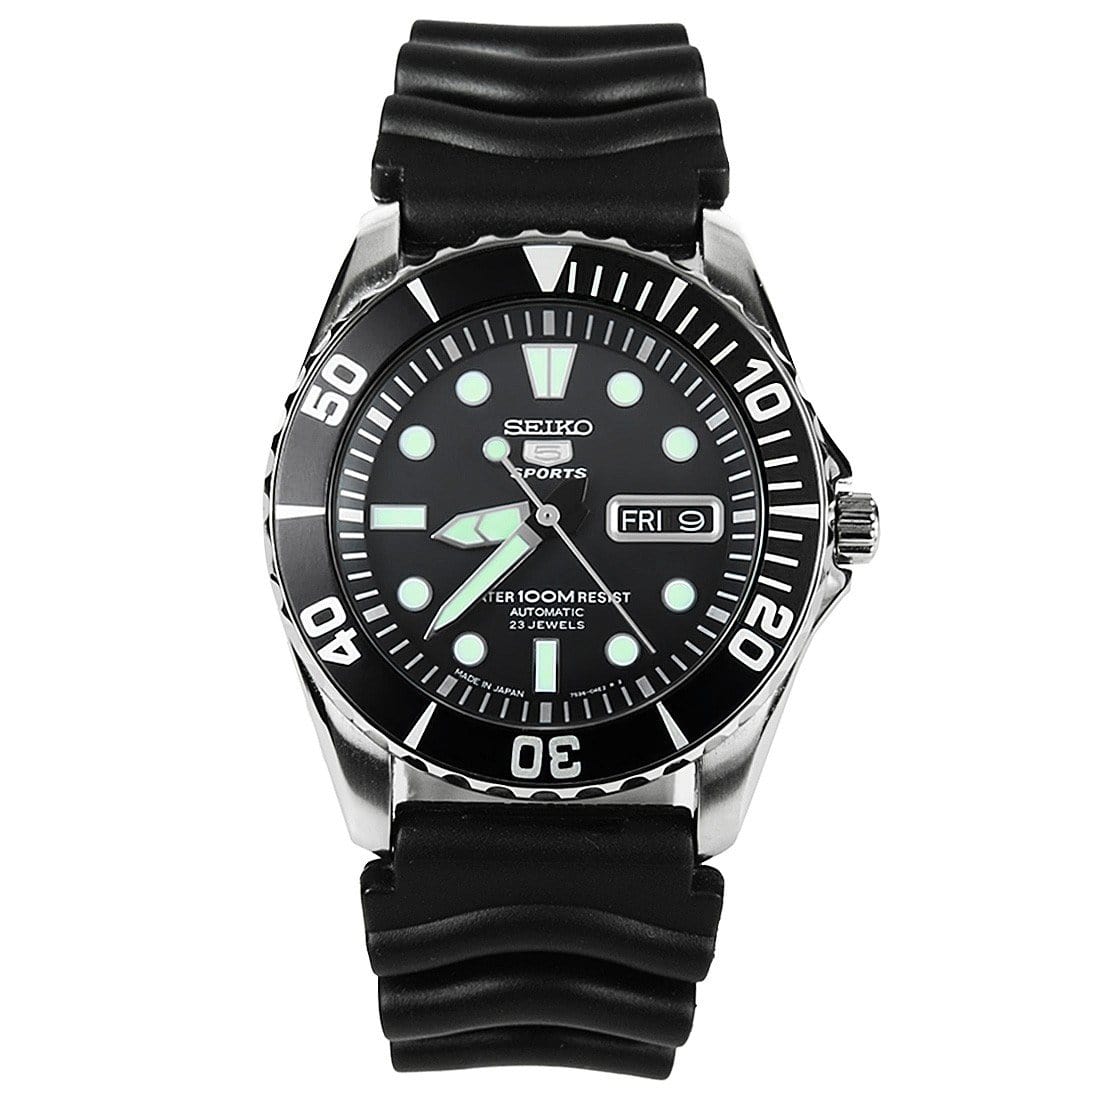 SNZF17J2 SNZF17 Seiko 5 Sports Diving Watch with Nylon Band